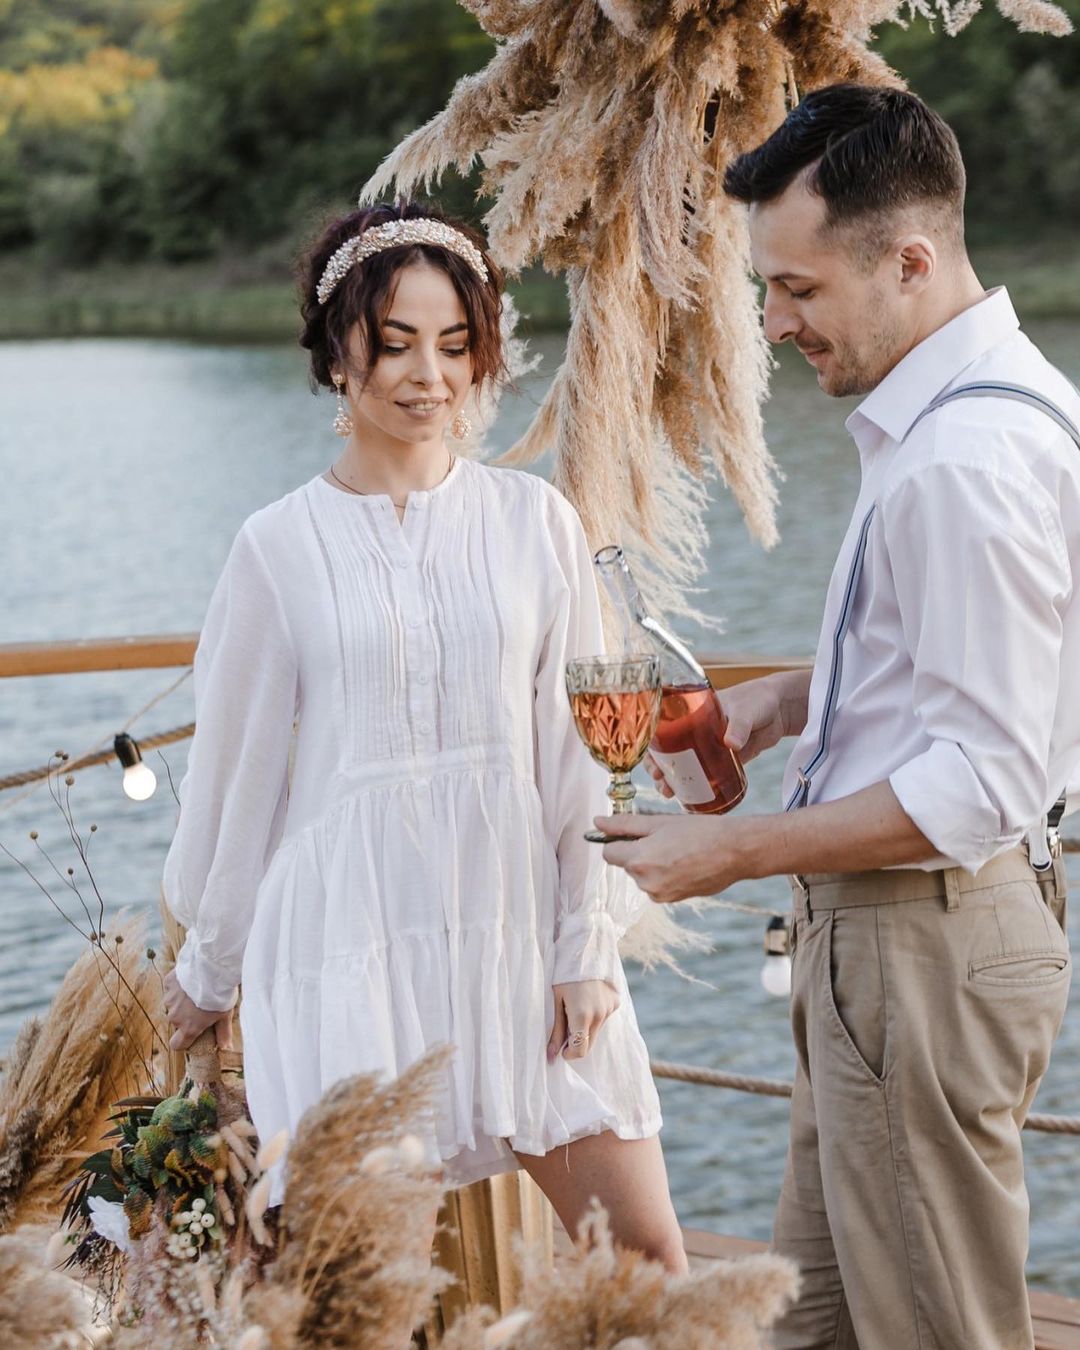 Special wedding moments on the picturesque wharf of Poiana Winery - Moldovan Wine-Country Retreats